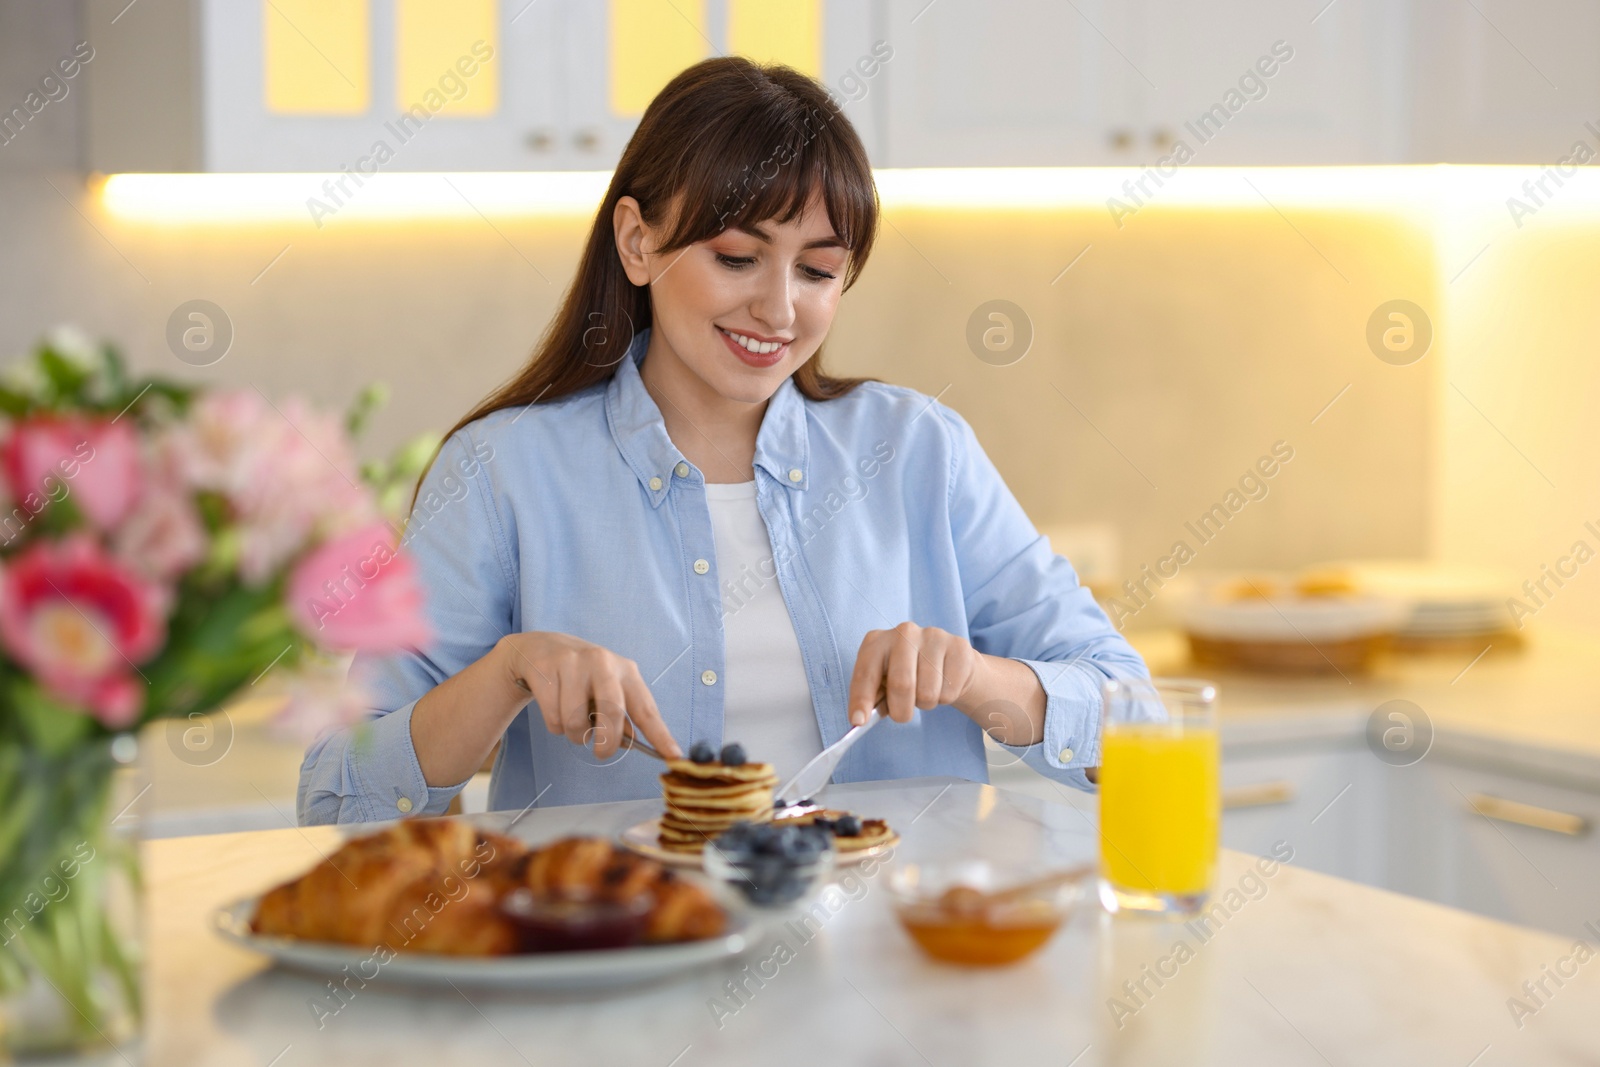 Photo of Smiling woman eating tasty pancakes at breakfast indoors